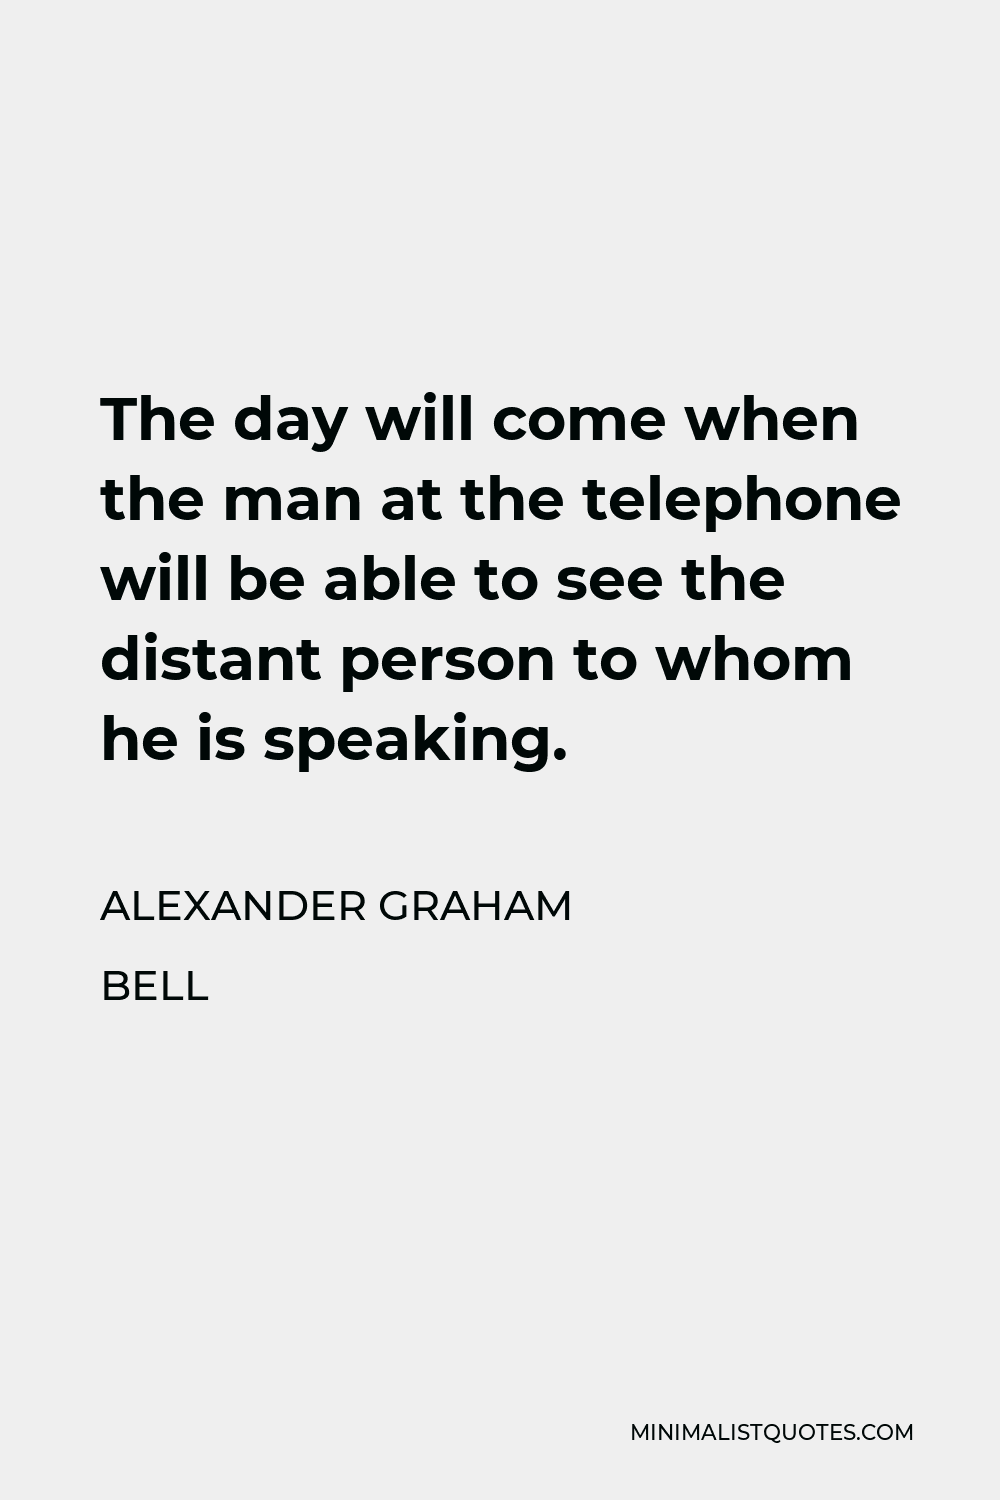 Alexander Graham Bell Quote - The day will come when the man at the telephone will be able to see the distant person to whom he is speaking.